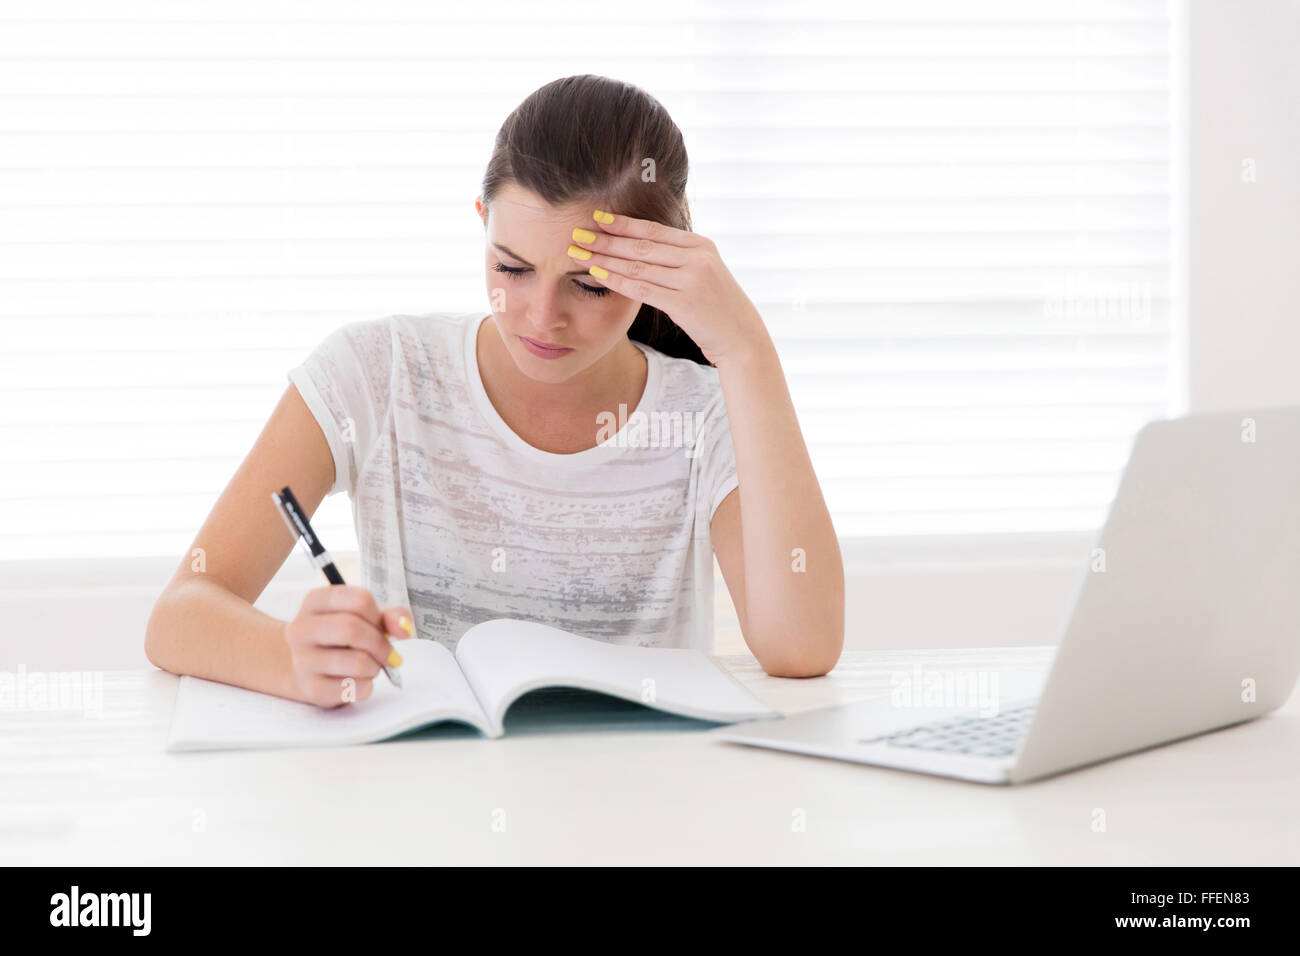 struggling teen girl studying at home Stock Photo